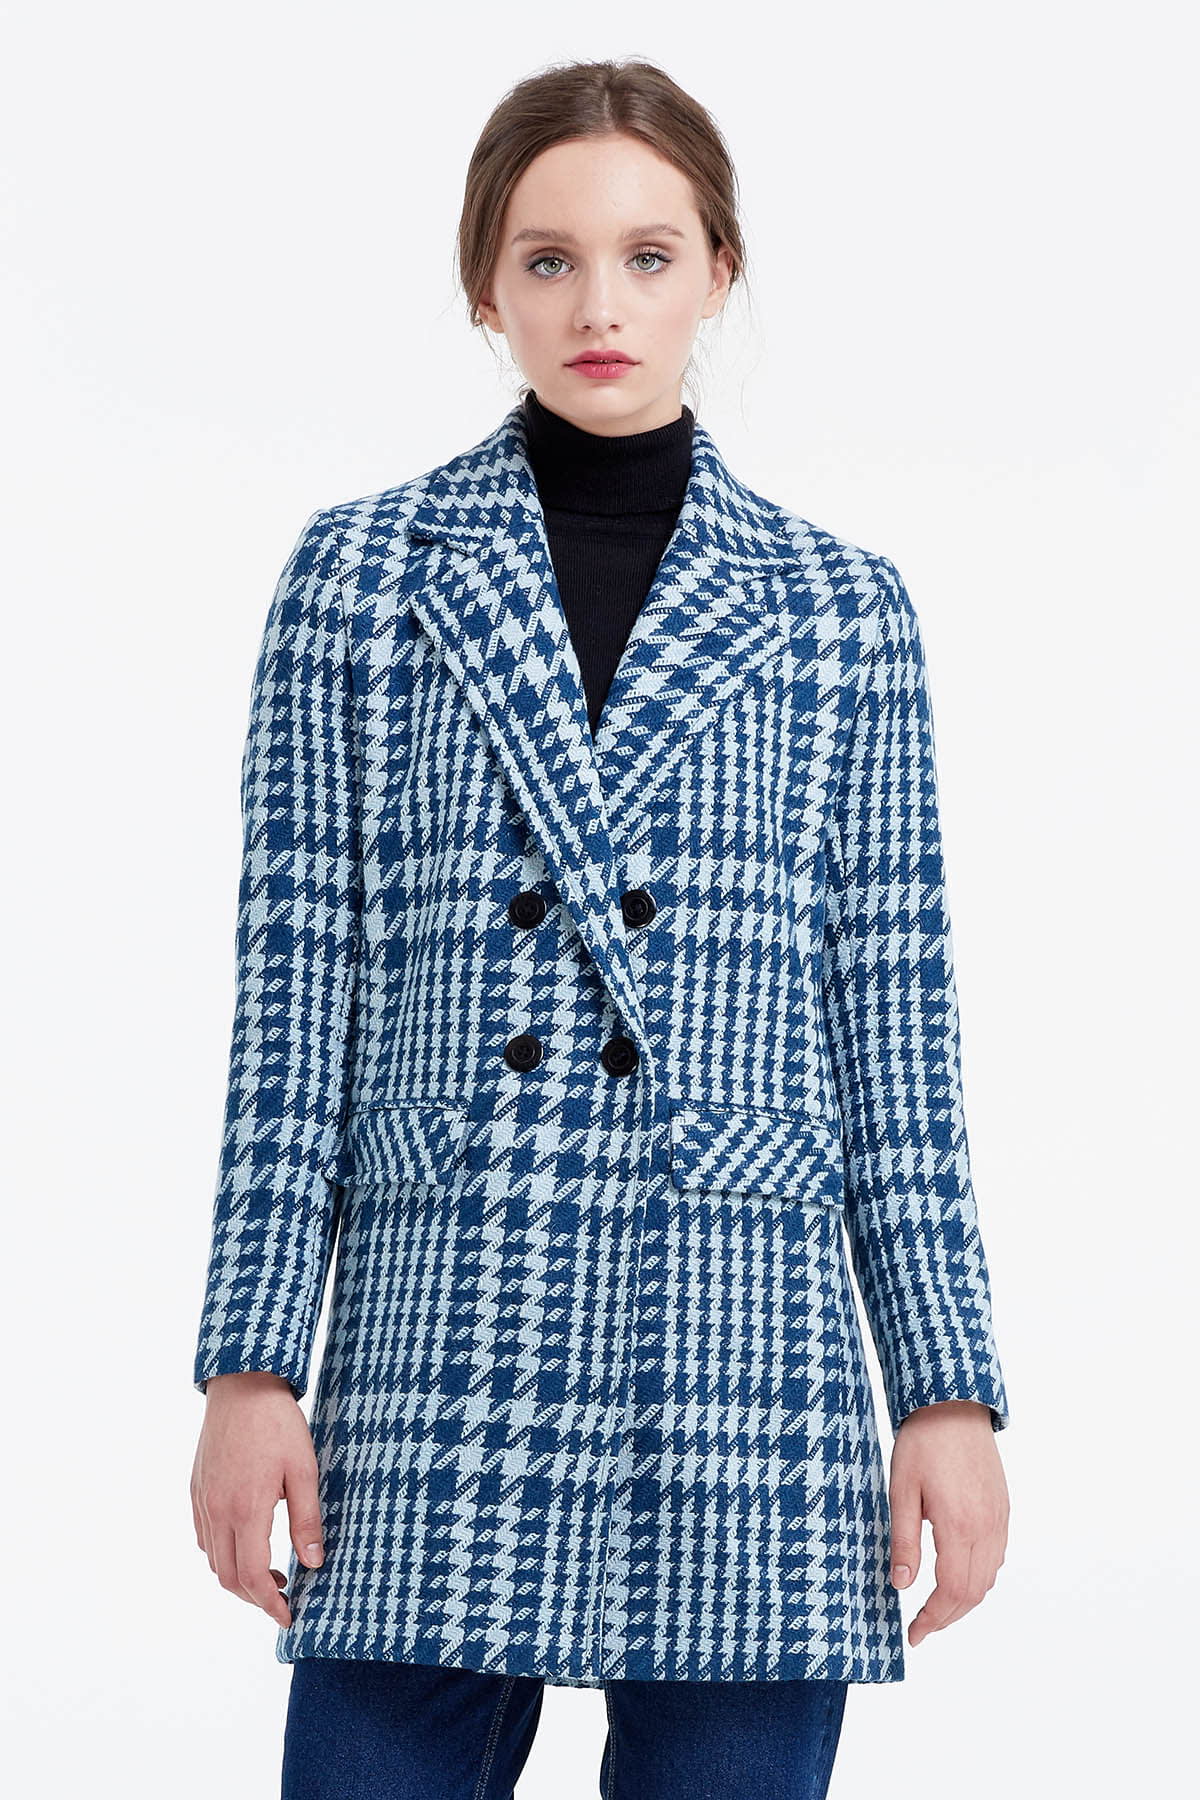 Long double-breasted jacket with a houndstooth print, photo 1